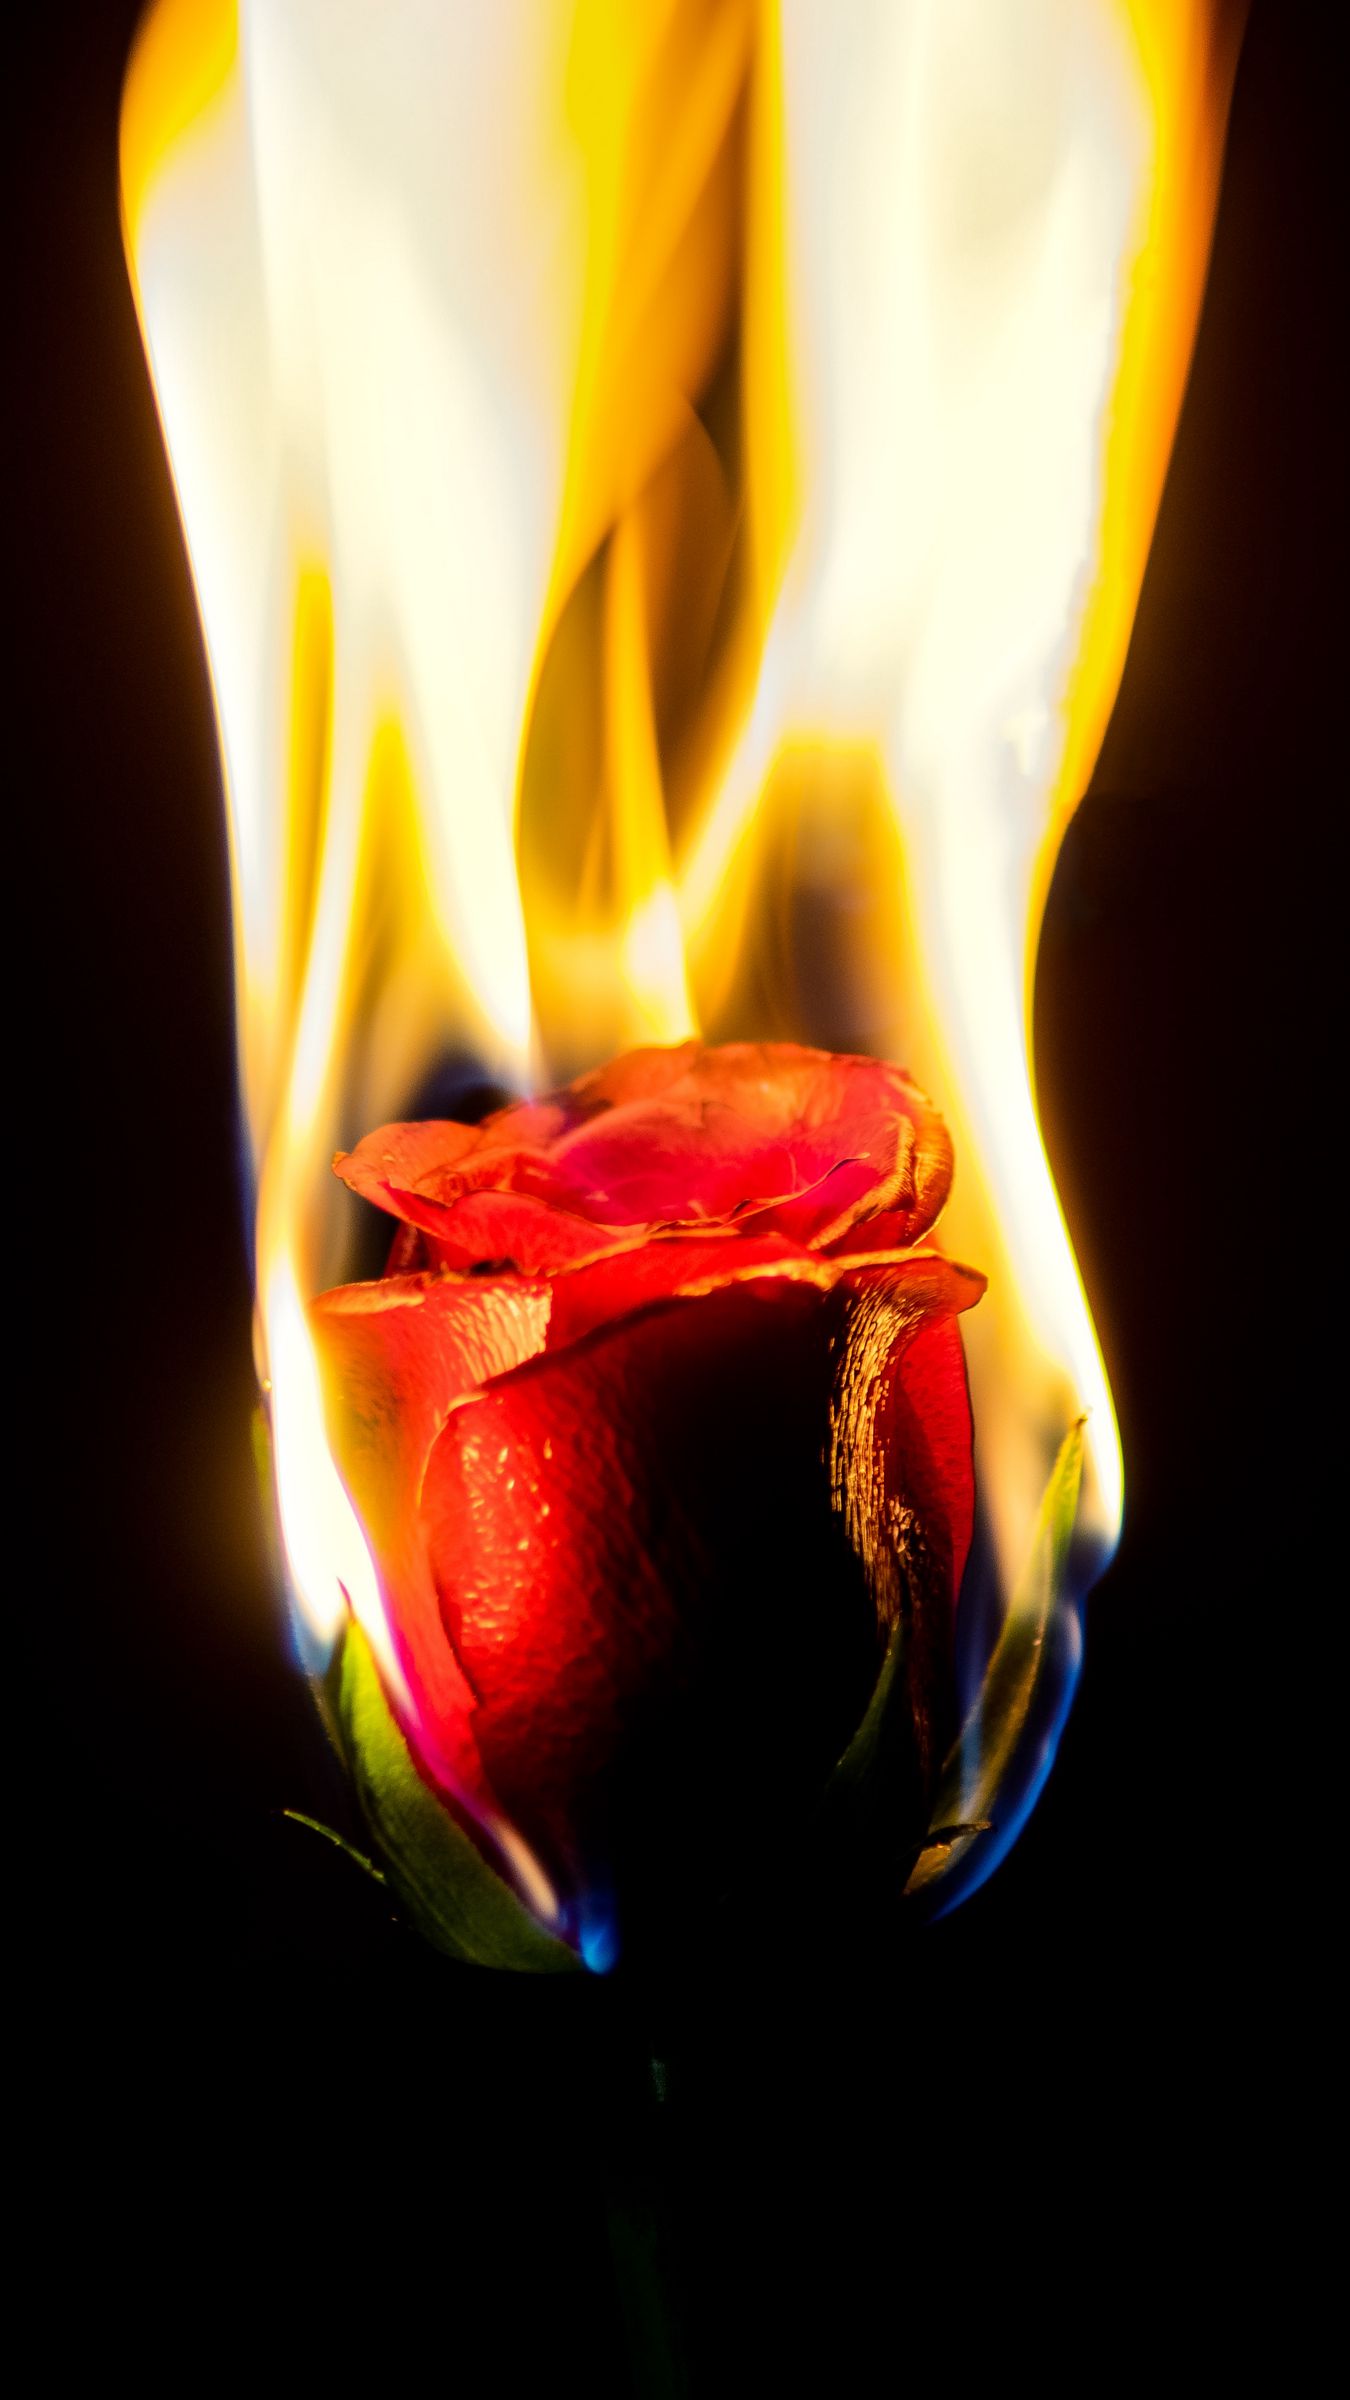 Wallpaper ID 1273604  moody rose real people burning holding burning  rose fire finger flowers indoors black background edgy matches  unrecognizable person human limb free download